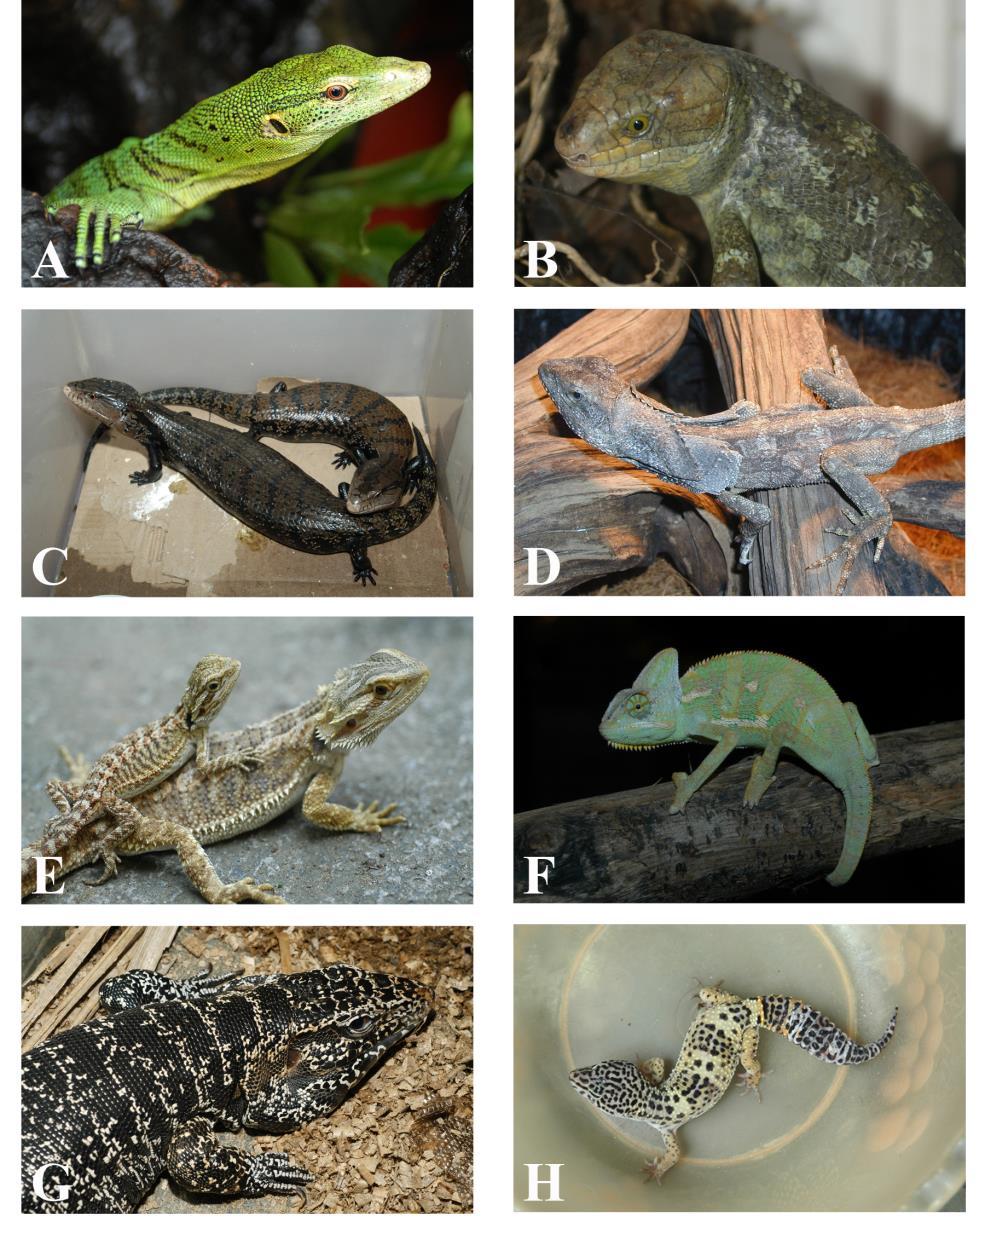 Checklist of Exotic Species in the Philippine Pet Trade,. Reptiles Figure 3 A H.